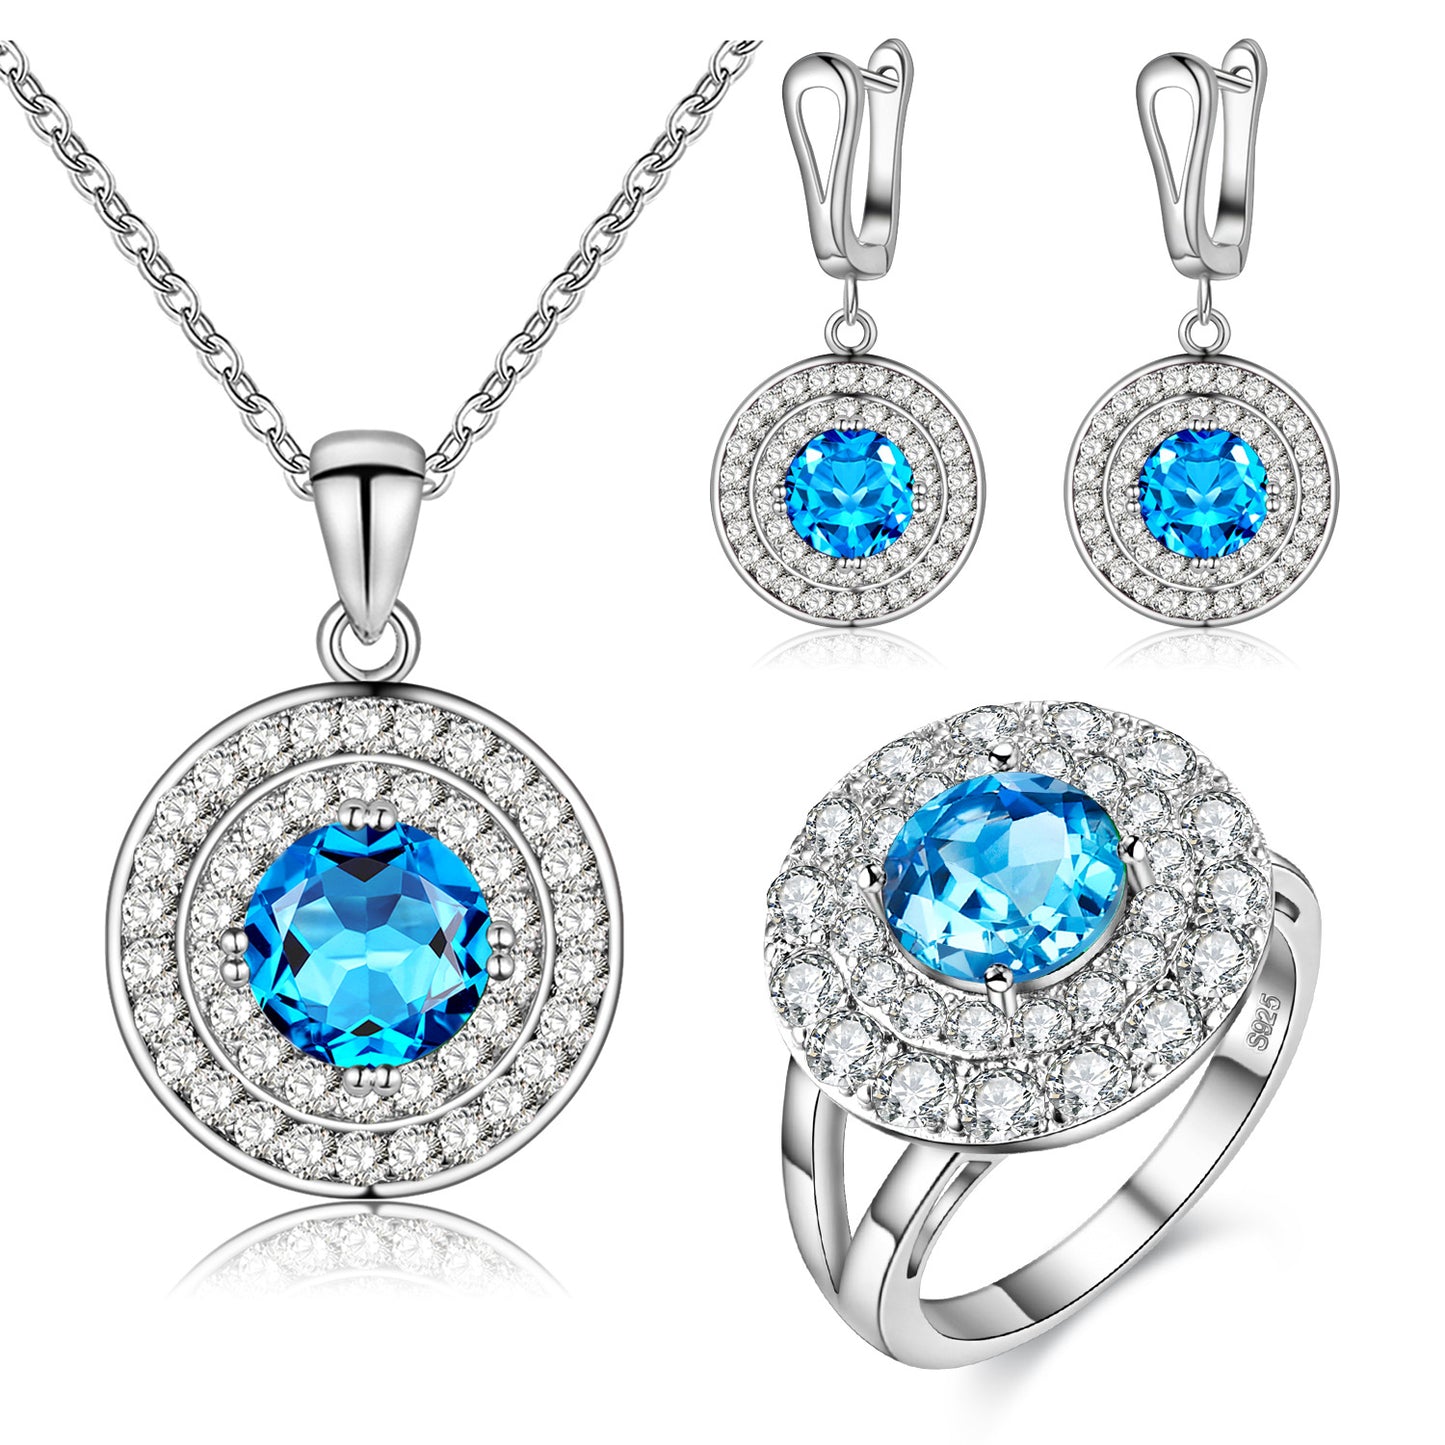 Jewelry Fashion Set Color Earrings Ring Necklace Three-Piece Necklace Set